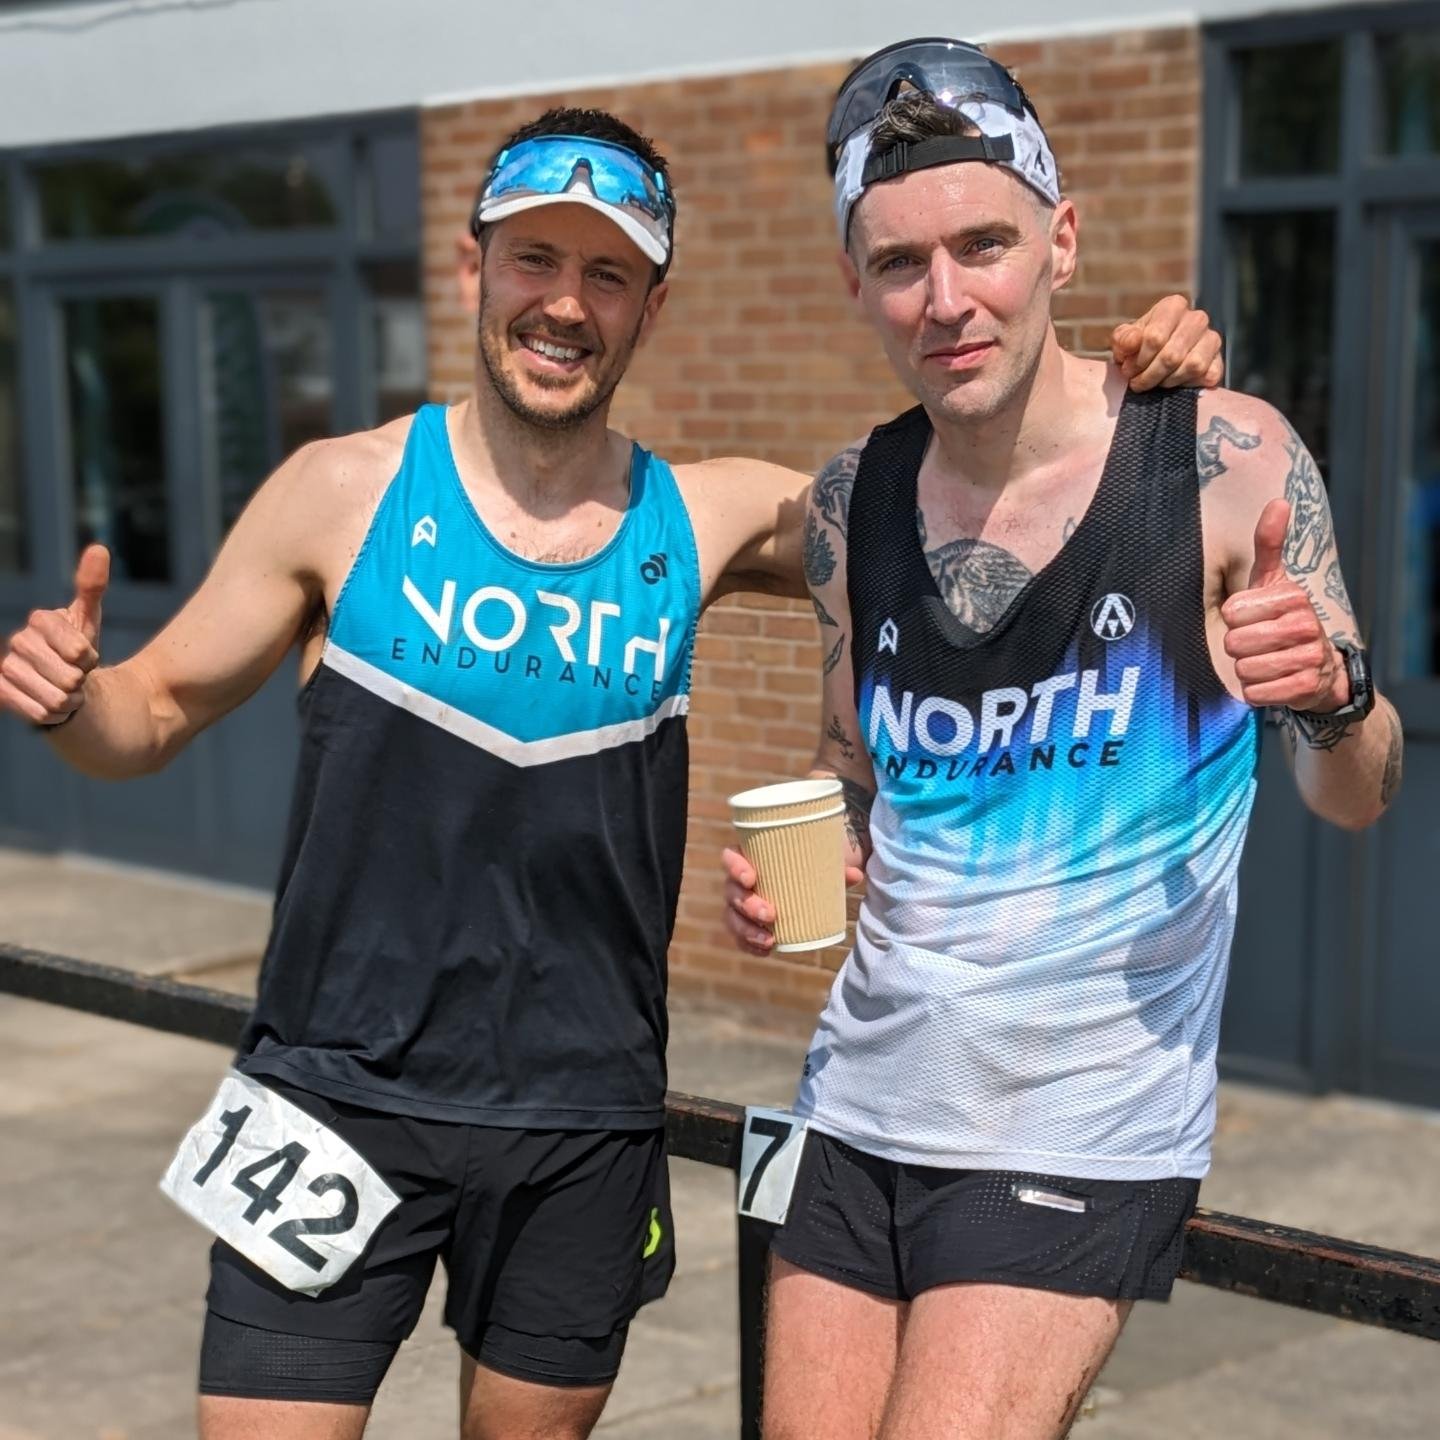 Challenge accepted! 🏃&zwj;♂️🏃&zwj;♂️🤙🏆

It was first and third overall for NE at the Joe Beswick Sandstone Trail Challenge with coach Paul Martin taking the win, ahead of run squad athlete and regular run Leader Fabian Devlin in 3rd overall 🥇🥉
